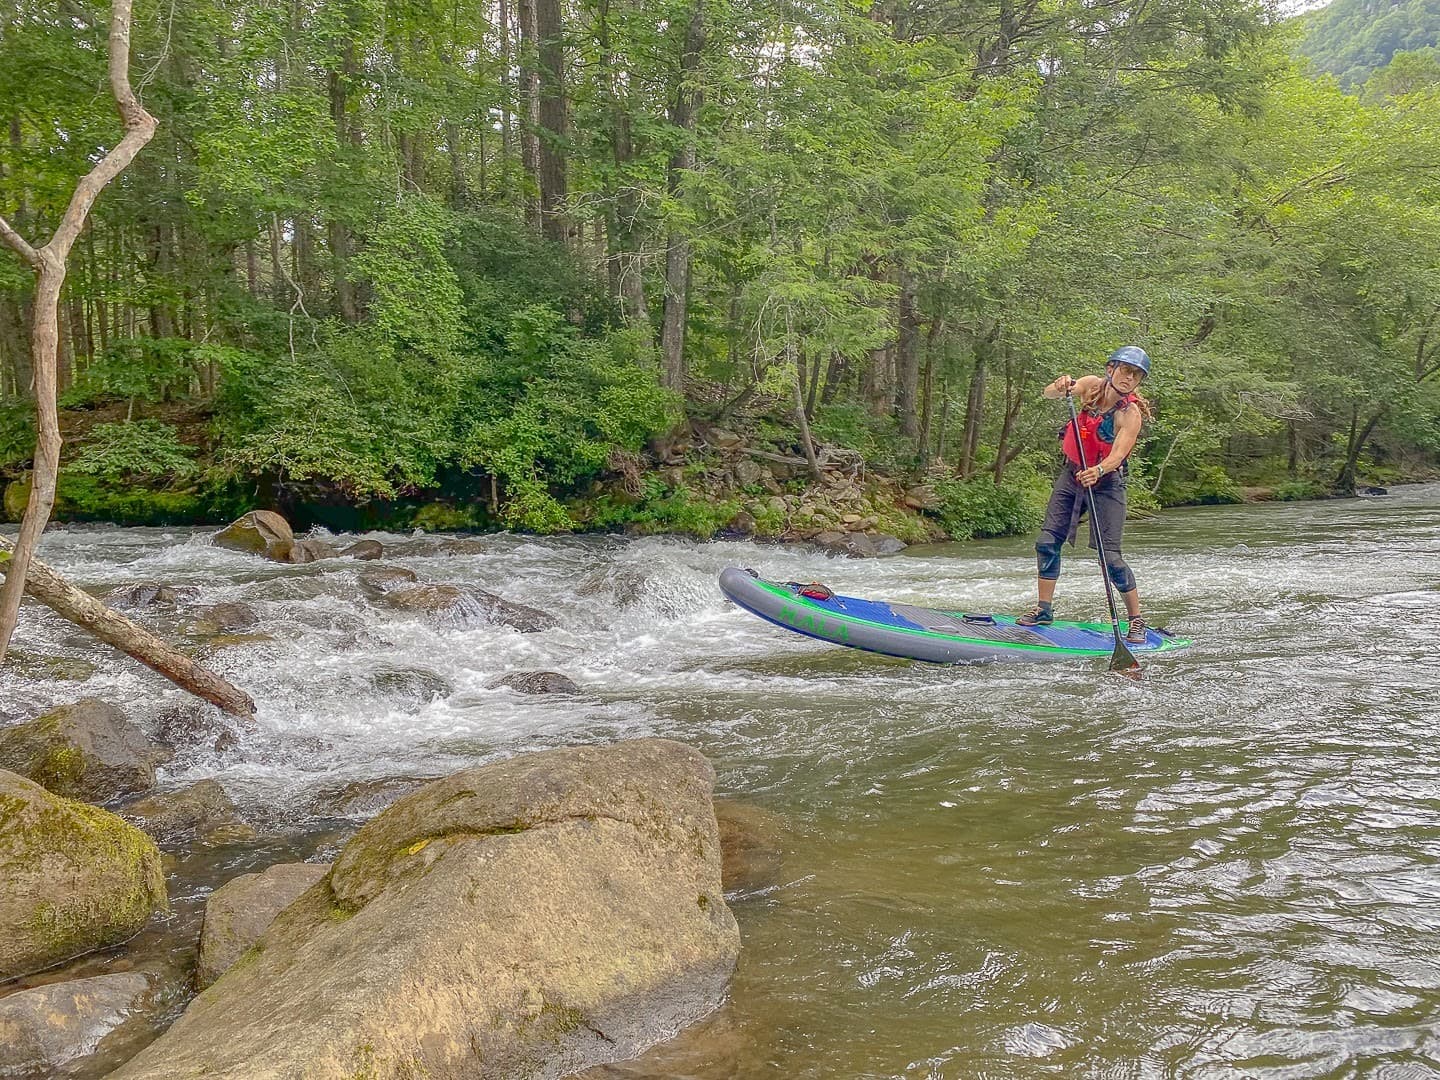 The 5 SUP Pointers for River Paddle Boarding | Paddling.com